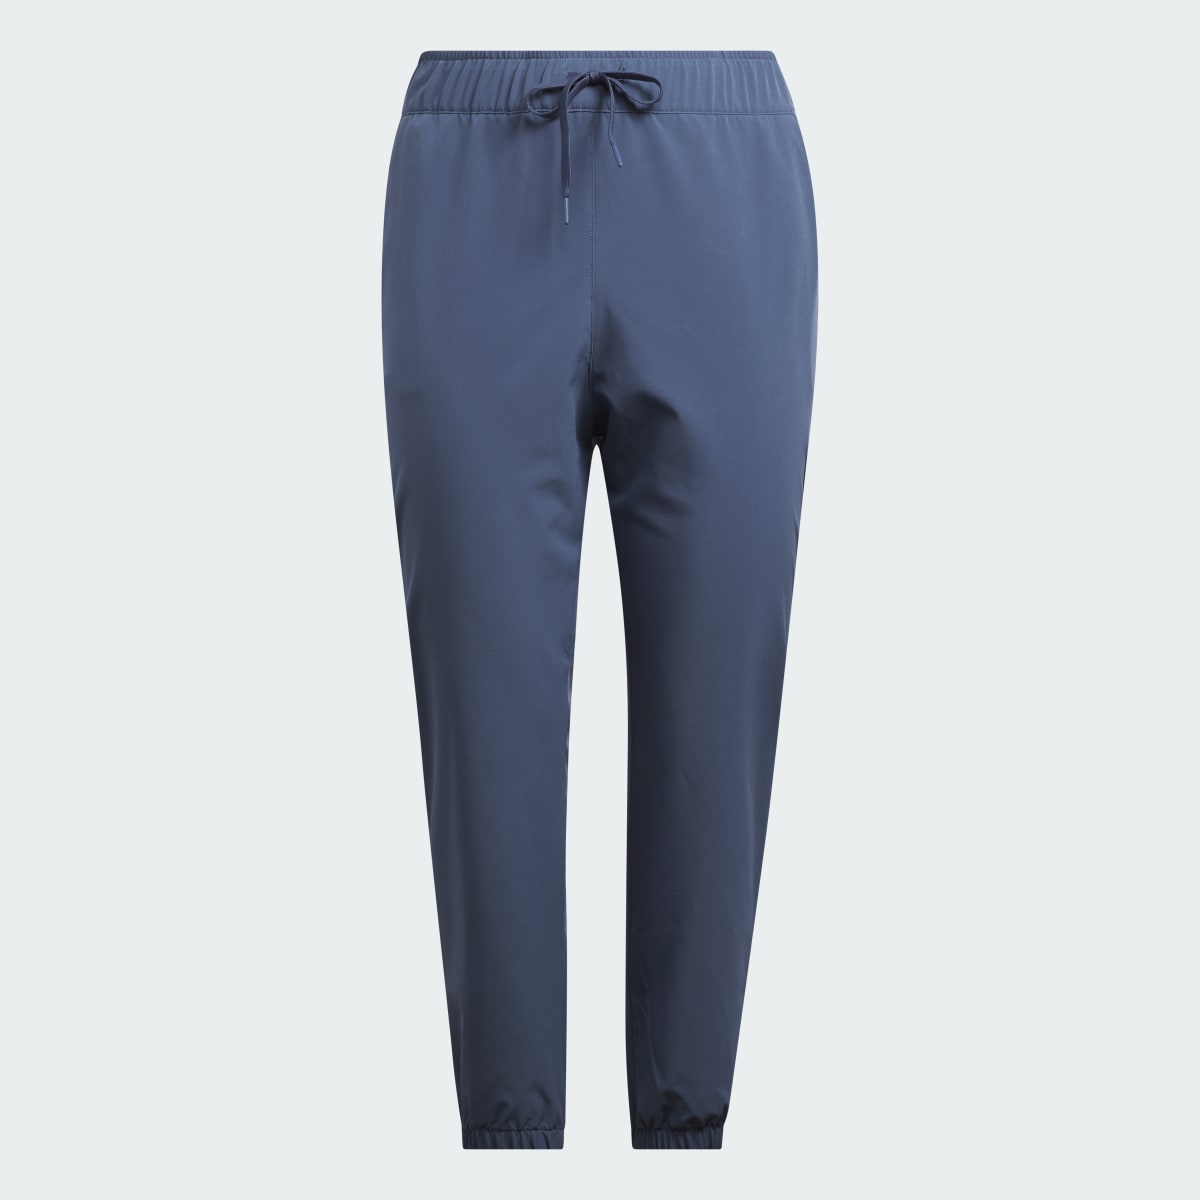 Adidas Ultimate365 Joggers (Plus Size). 4